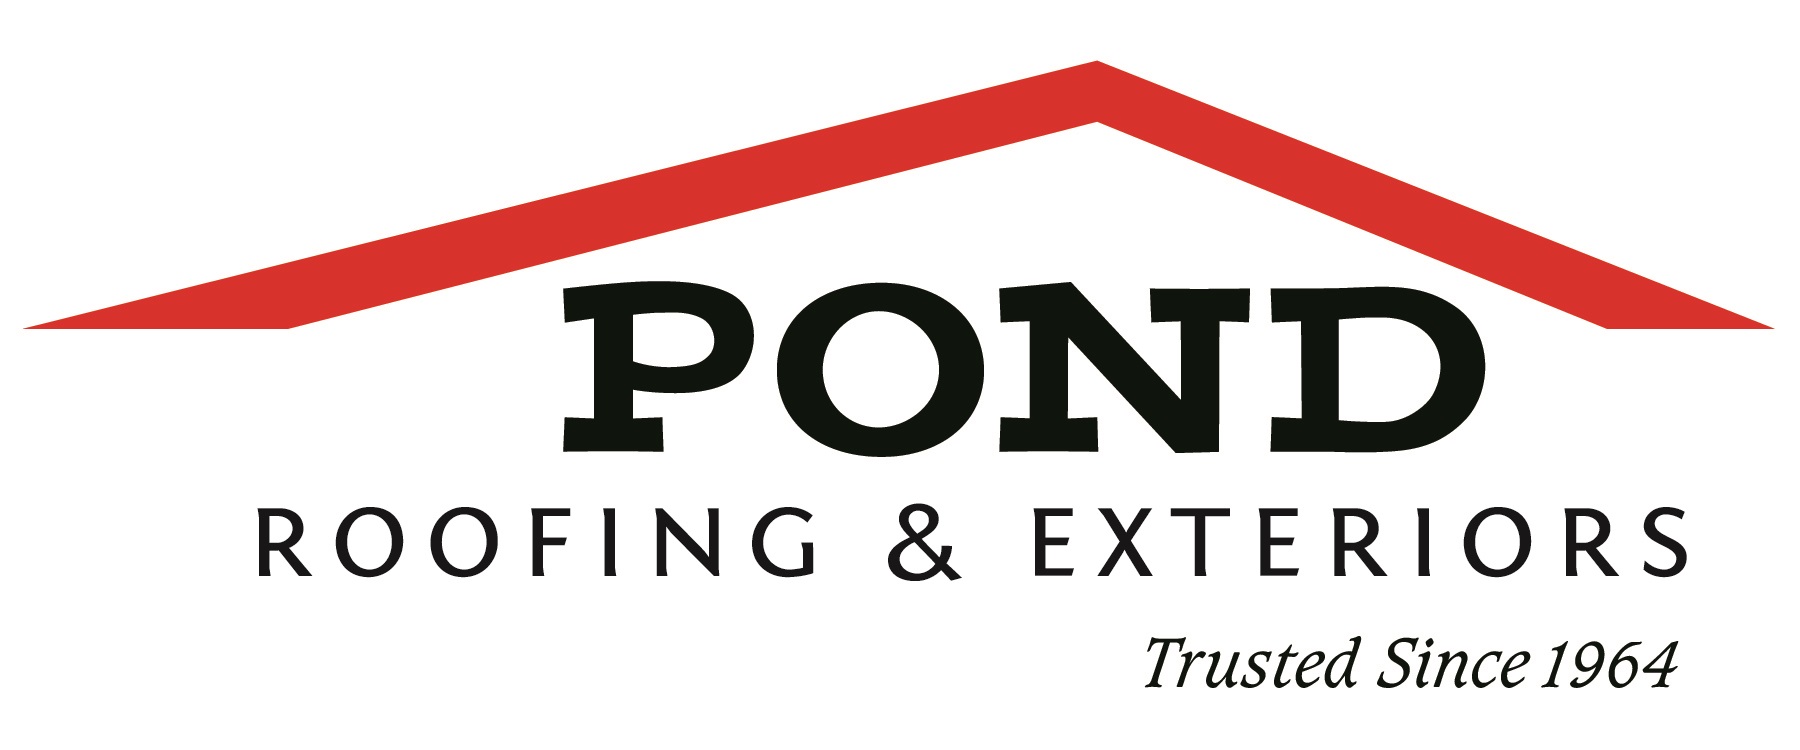 Pond Roofing Co. logo